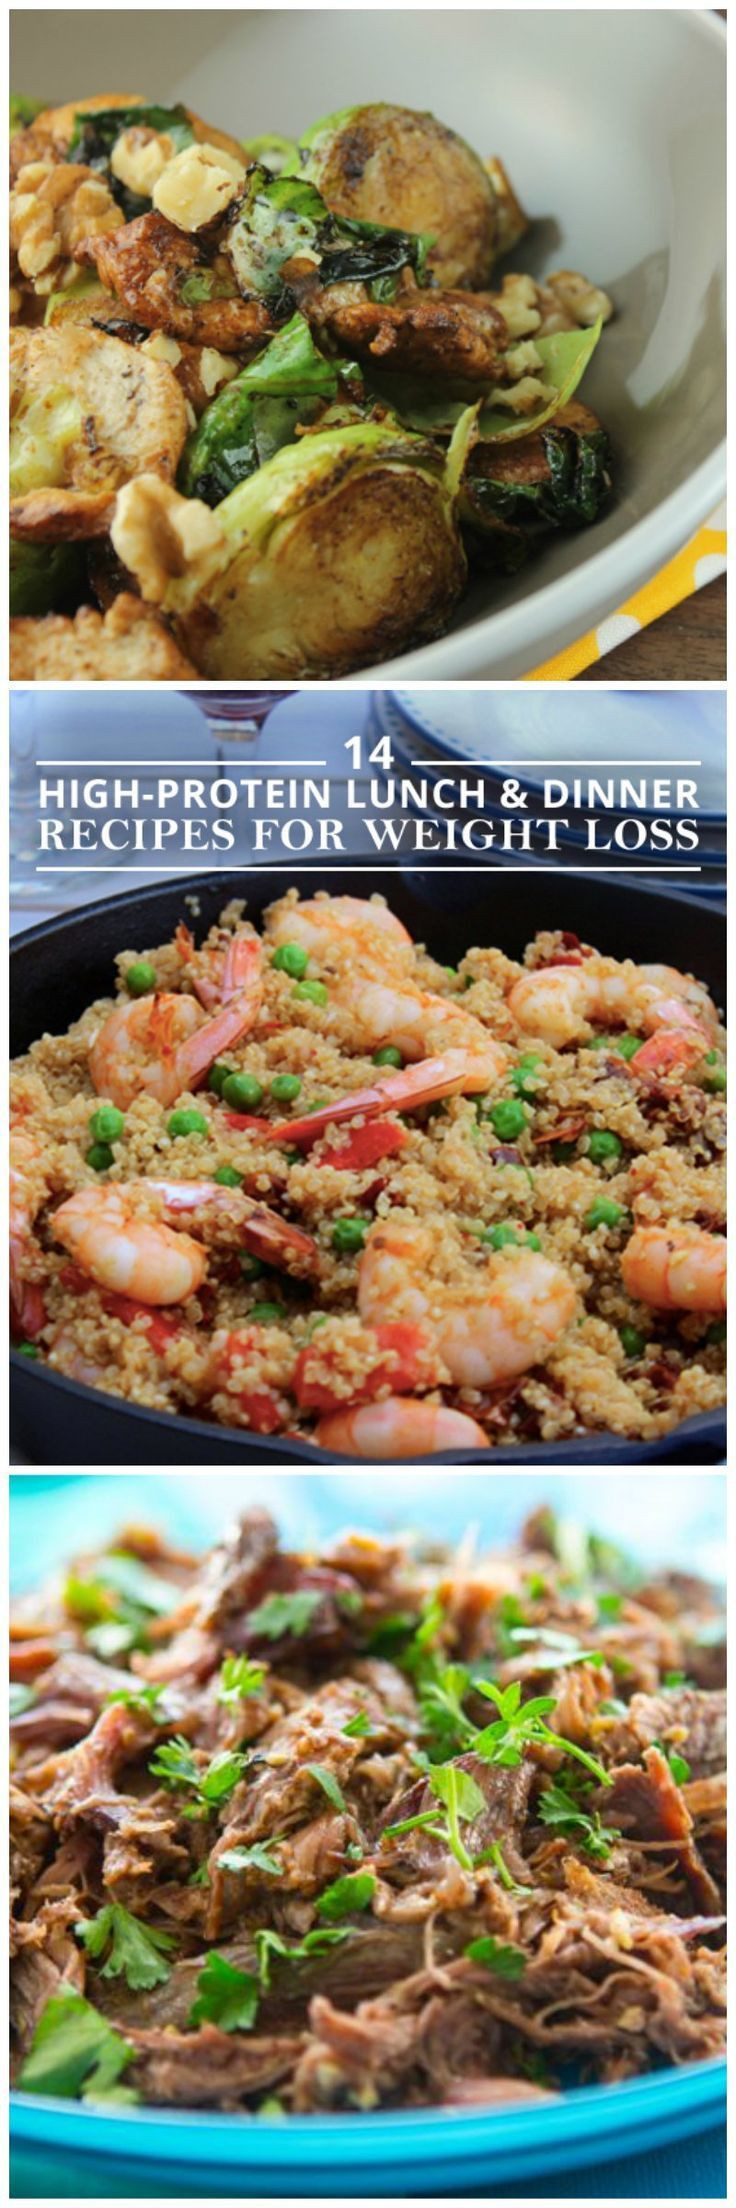 High Protein Dinner Recipes For Weight Loss
 97 best images about High Protein Low Carb Recipes on